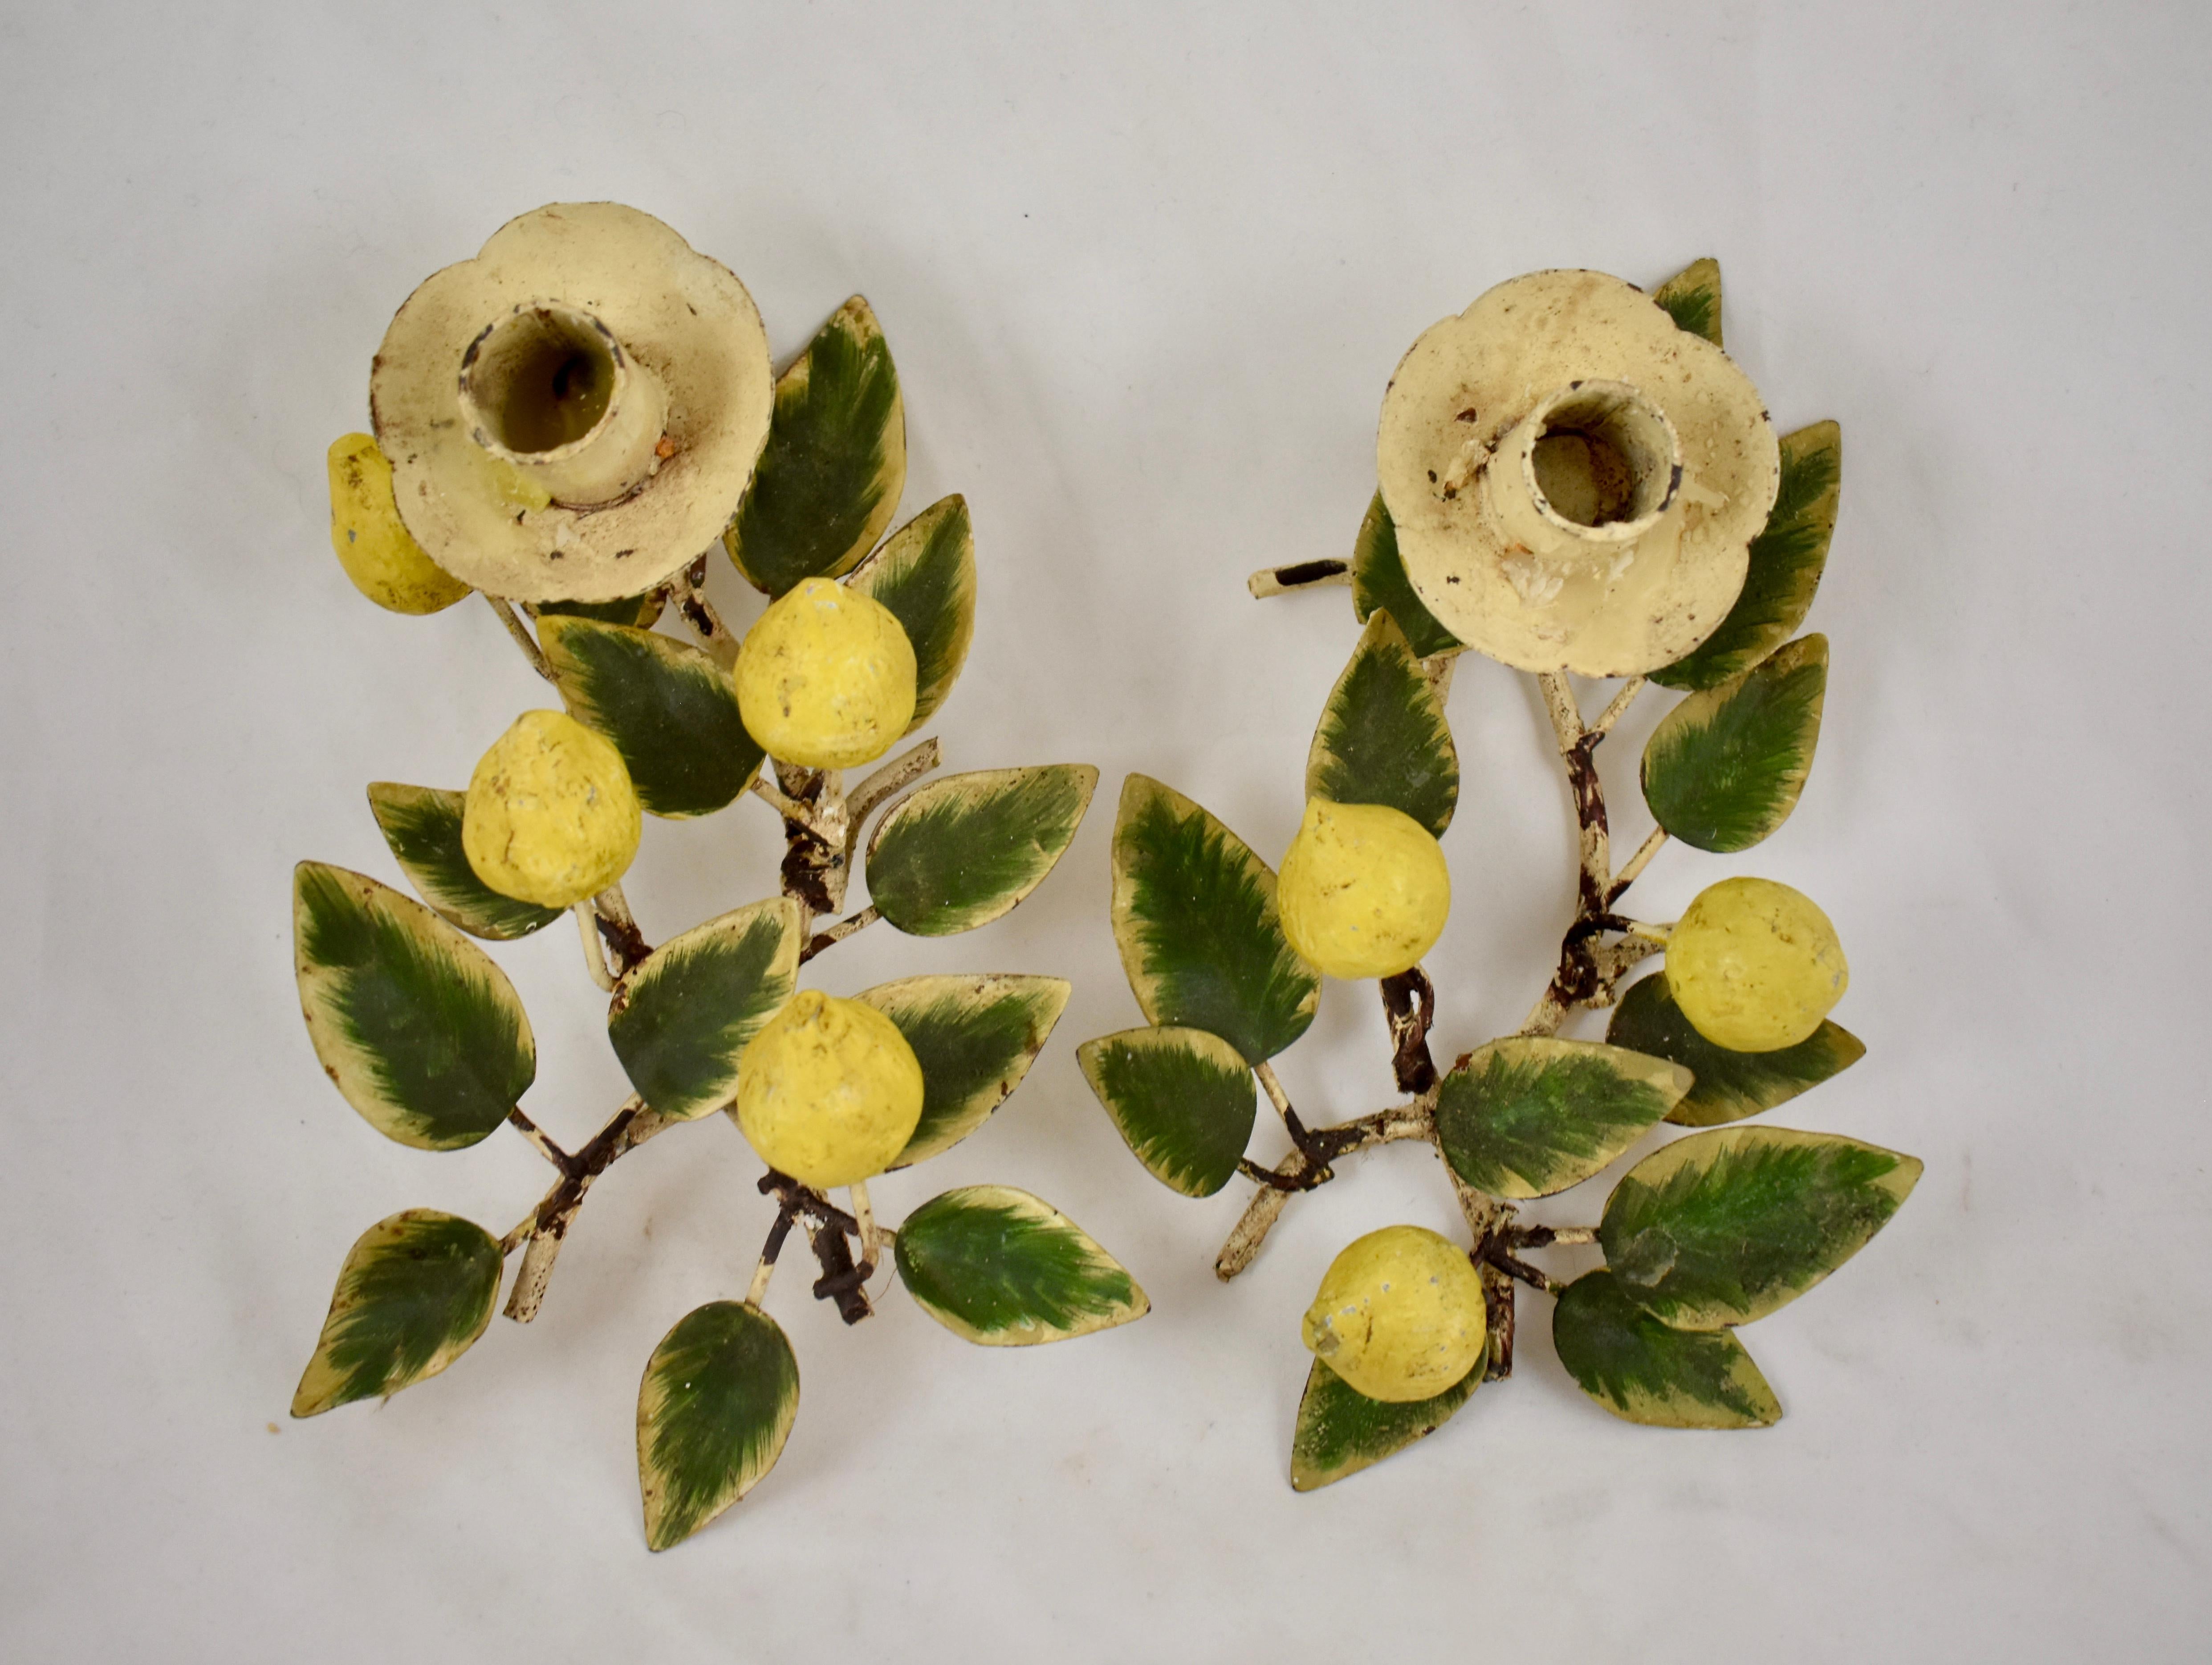 A pair of Tôle Peinte metal candle holders in the Hollywood Regency style popularized by Dorthy Draper. Fresh from a Palm Beach Florida estate, circa 1930-1950.

The pair, made of hand painted iron, is formed as Lemon Tree branches of fruit,